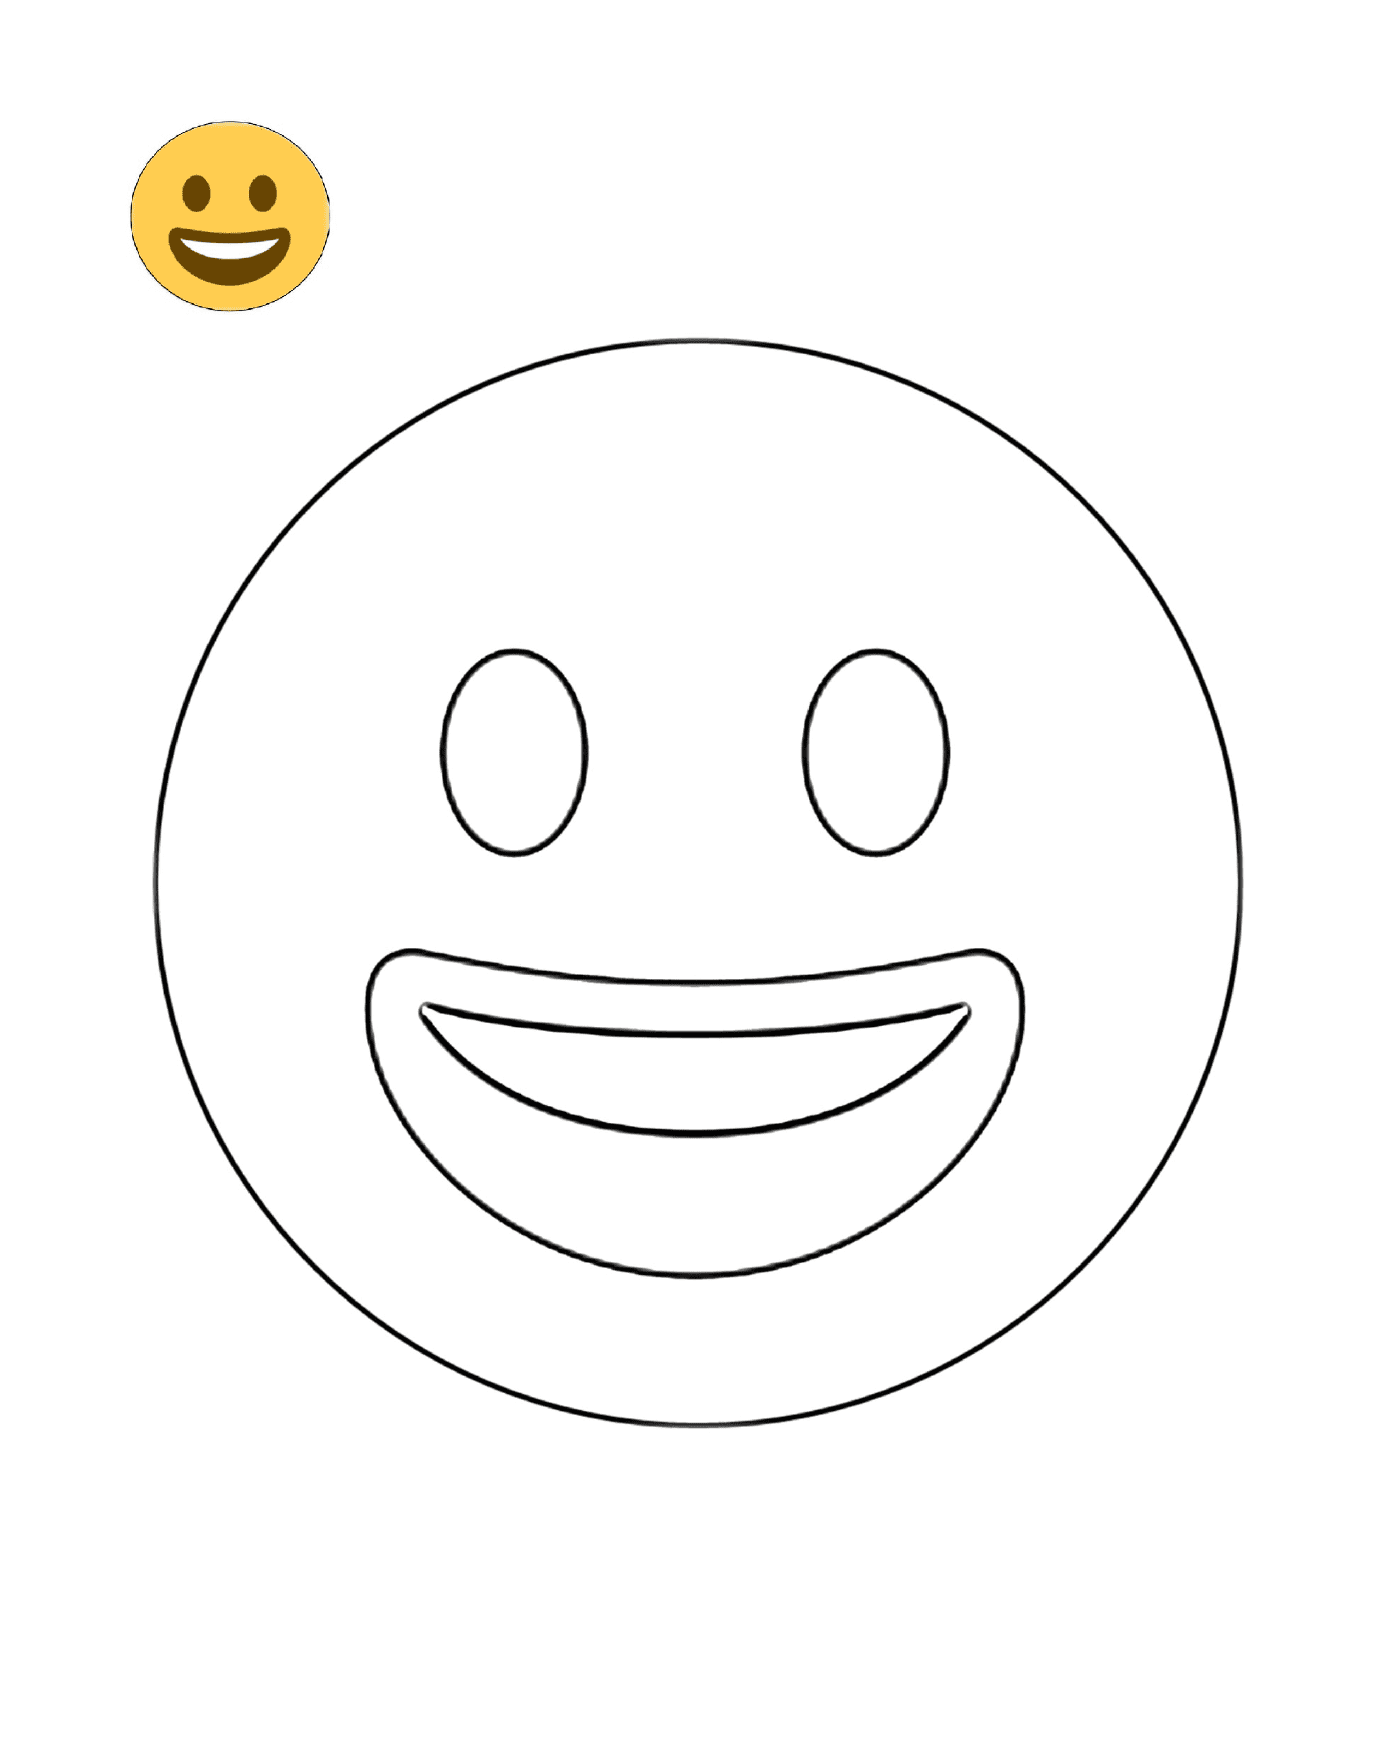  A smiling face with teeth 